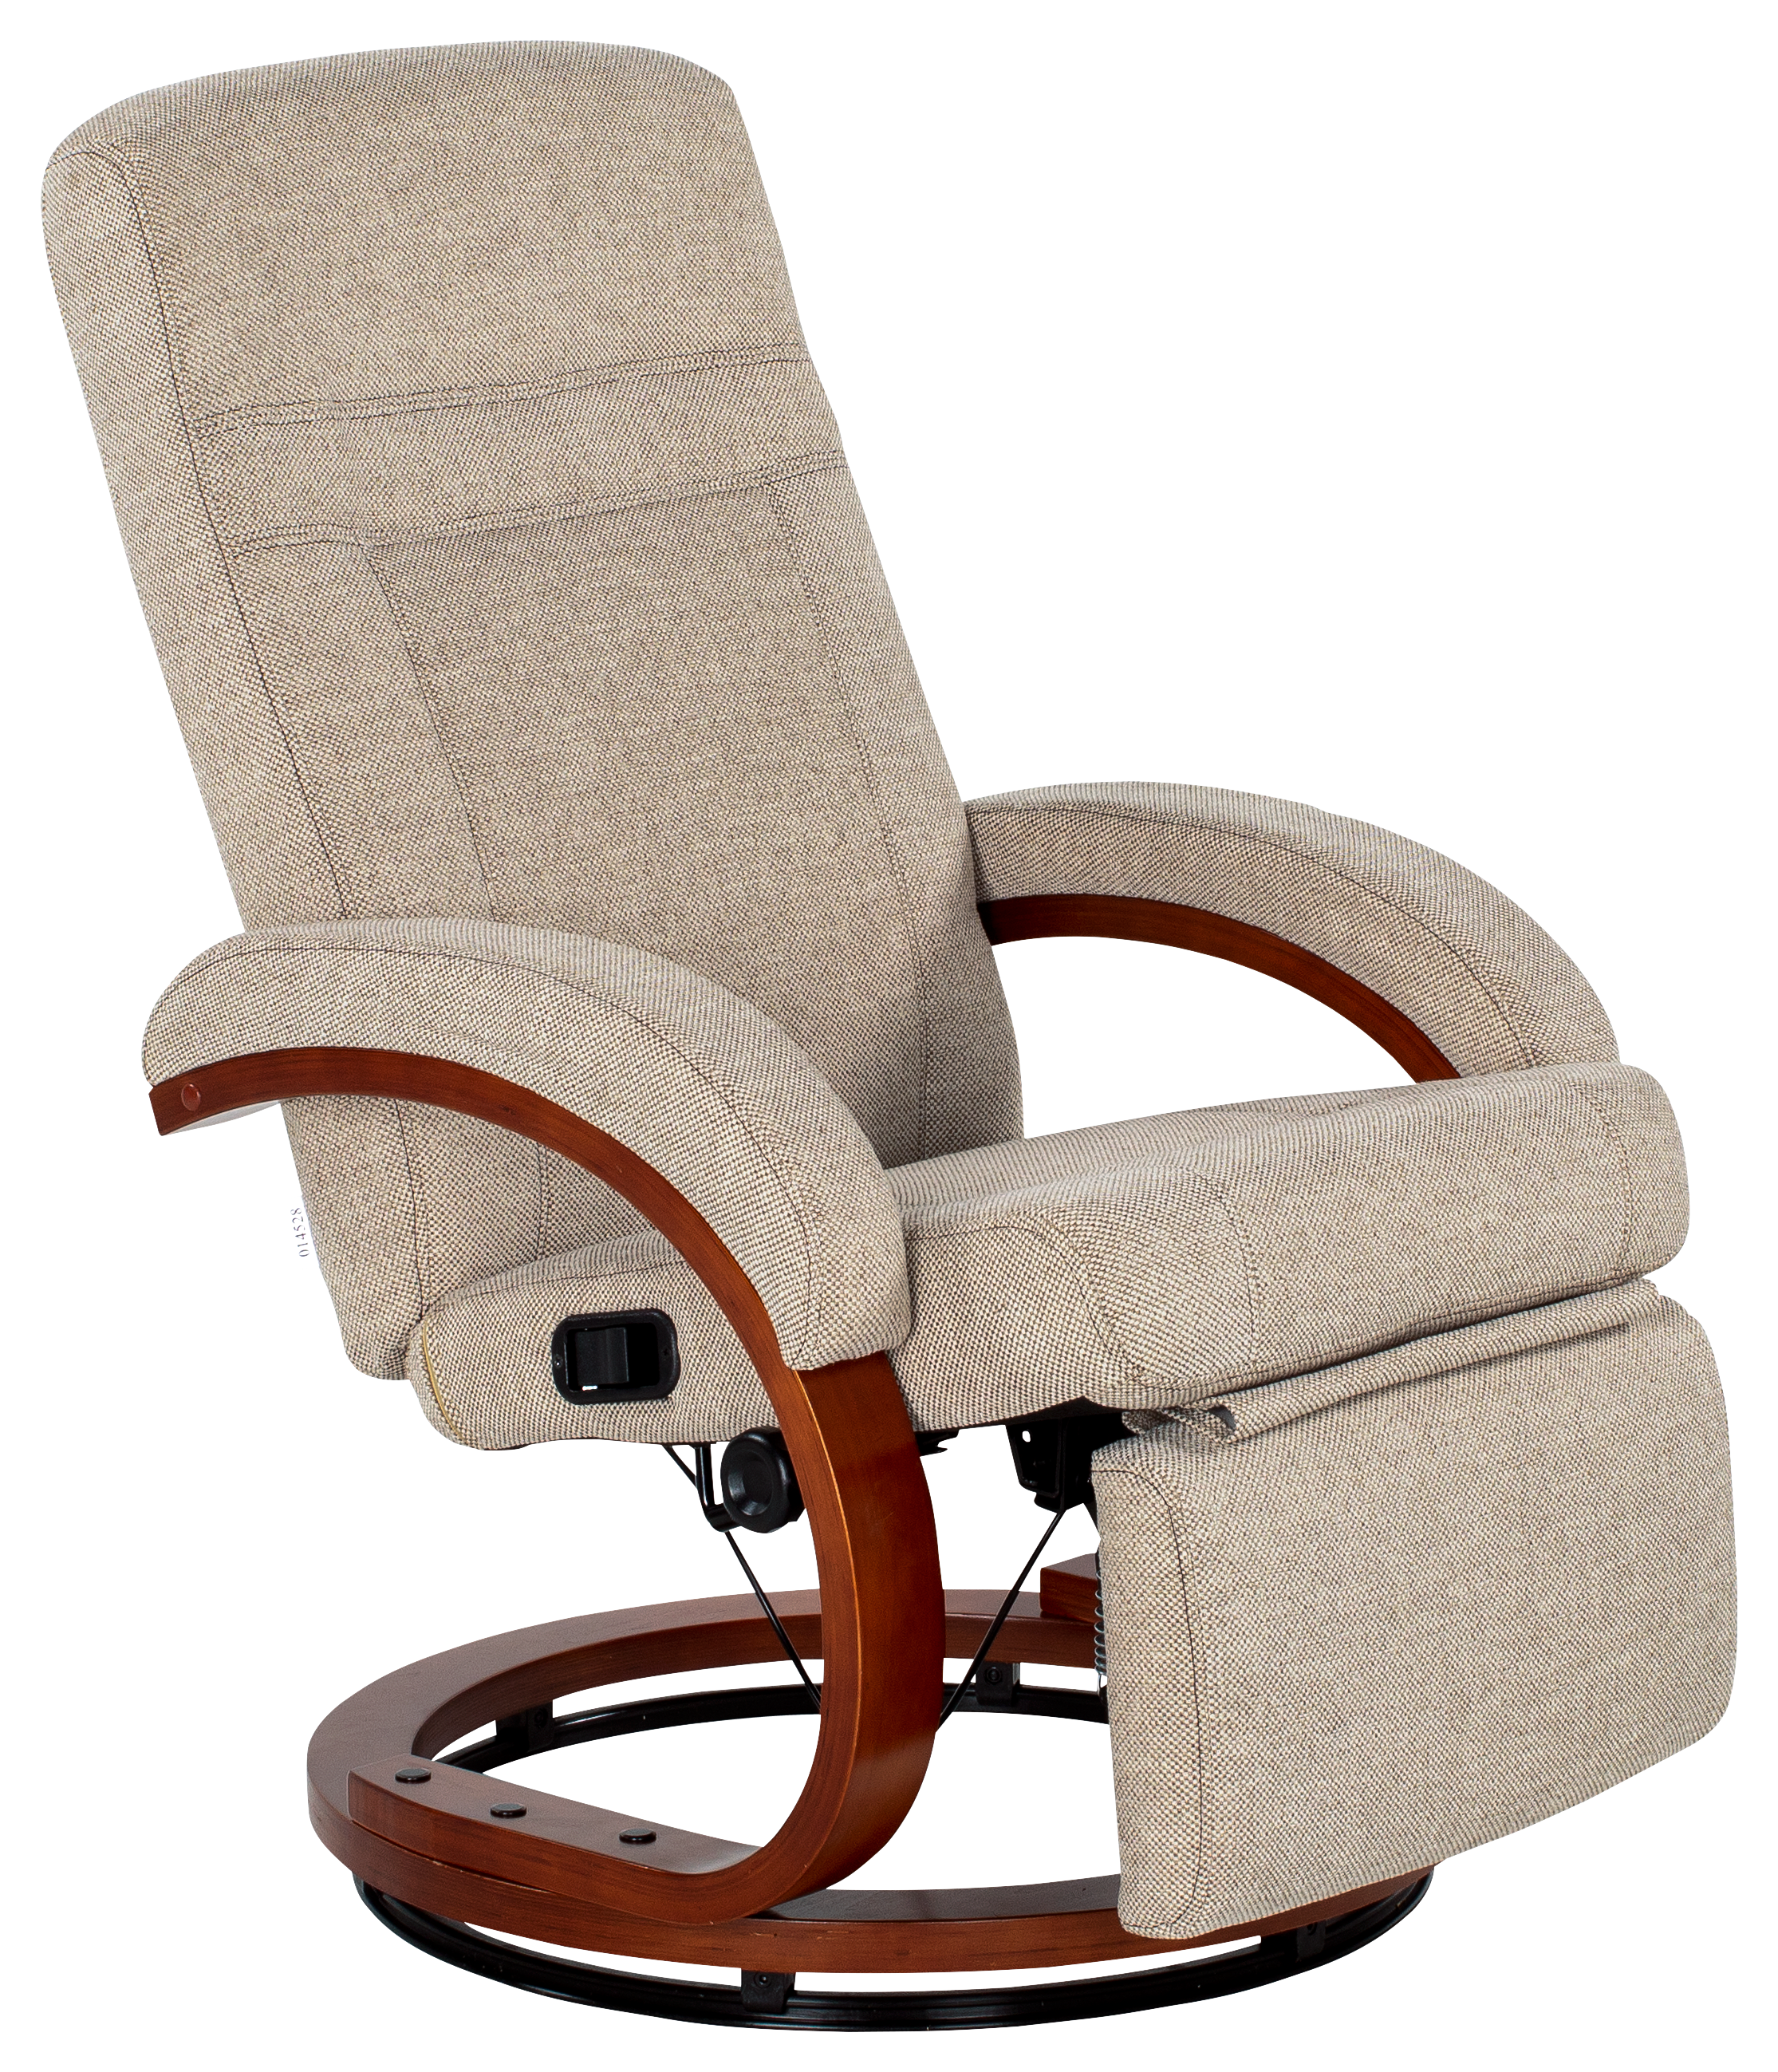 Thomas Payne Norlina RV Furniture Collection Euro Chair Recliner with Footrest